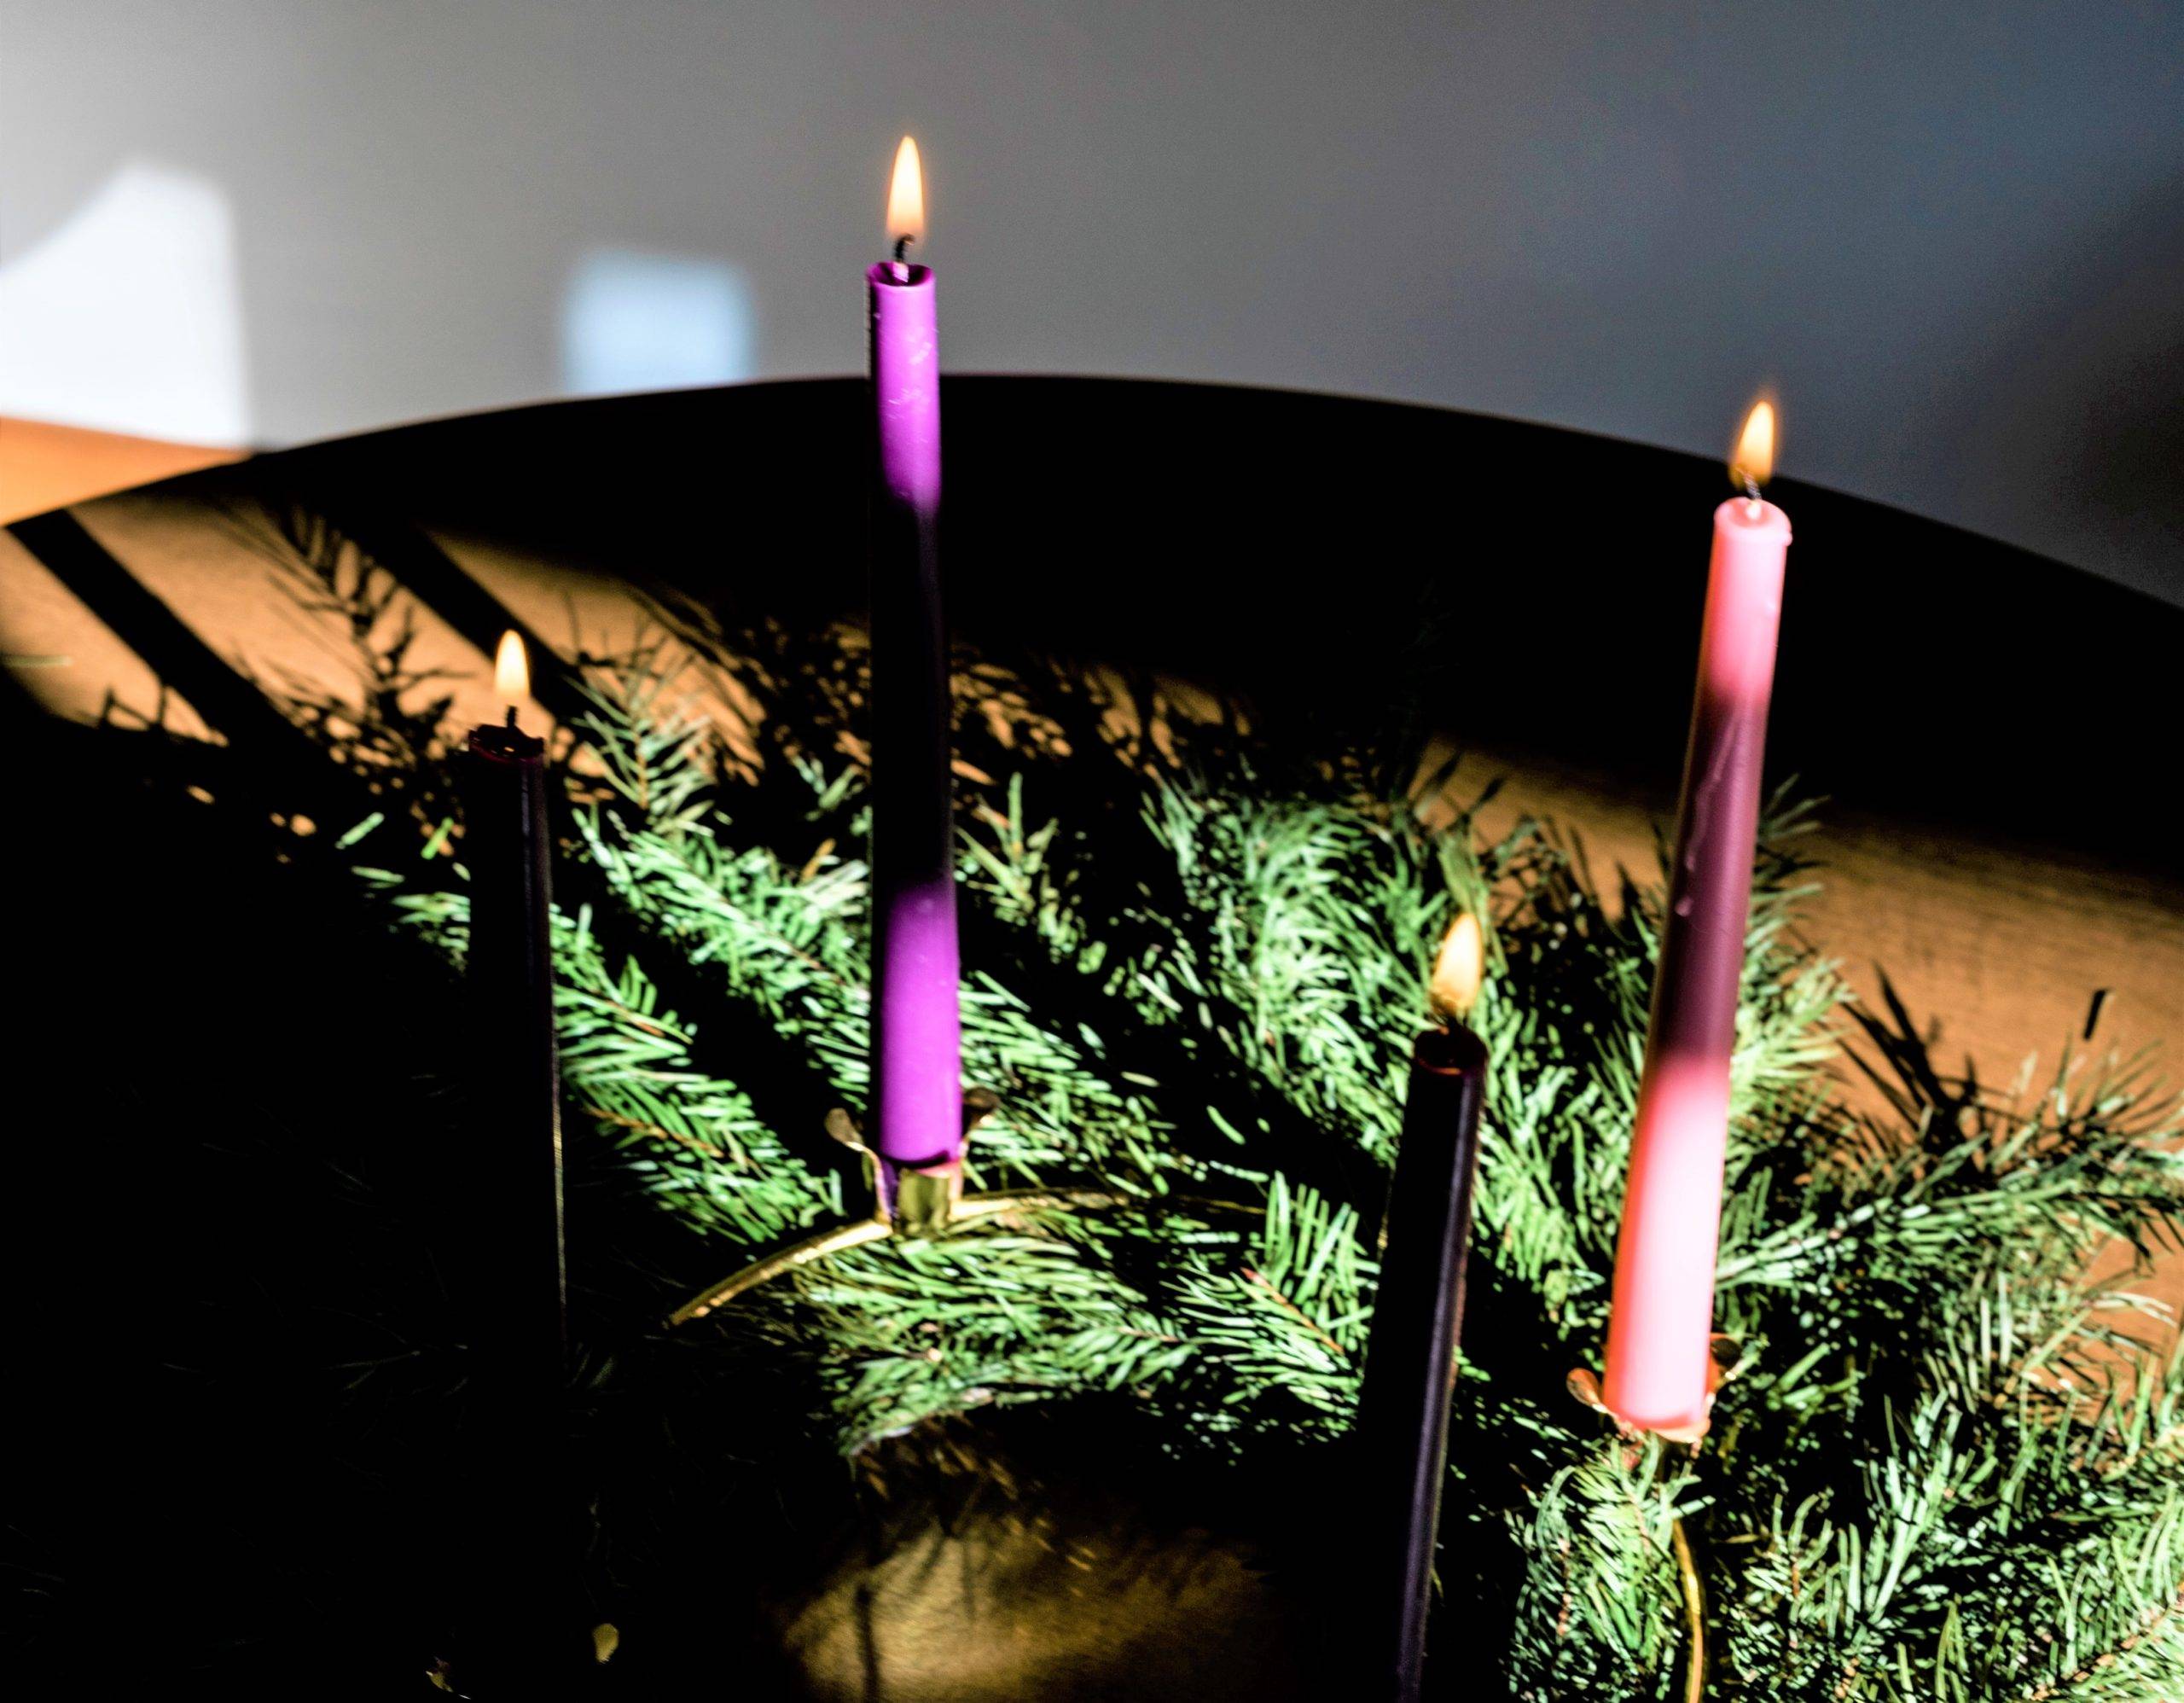 Featured image for “Advent Baskets”